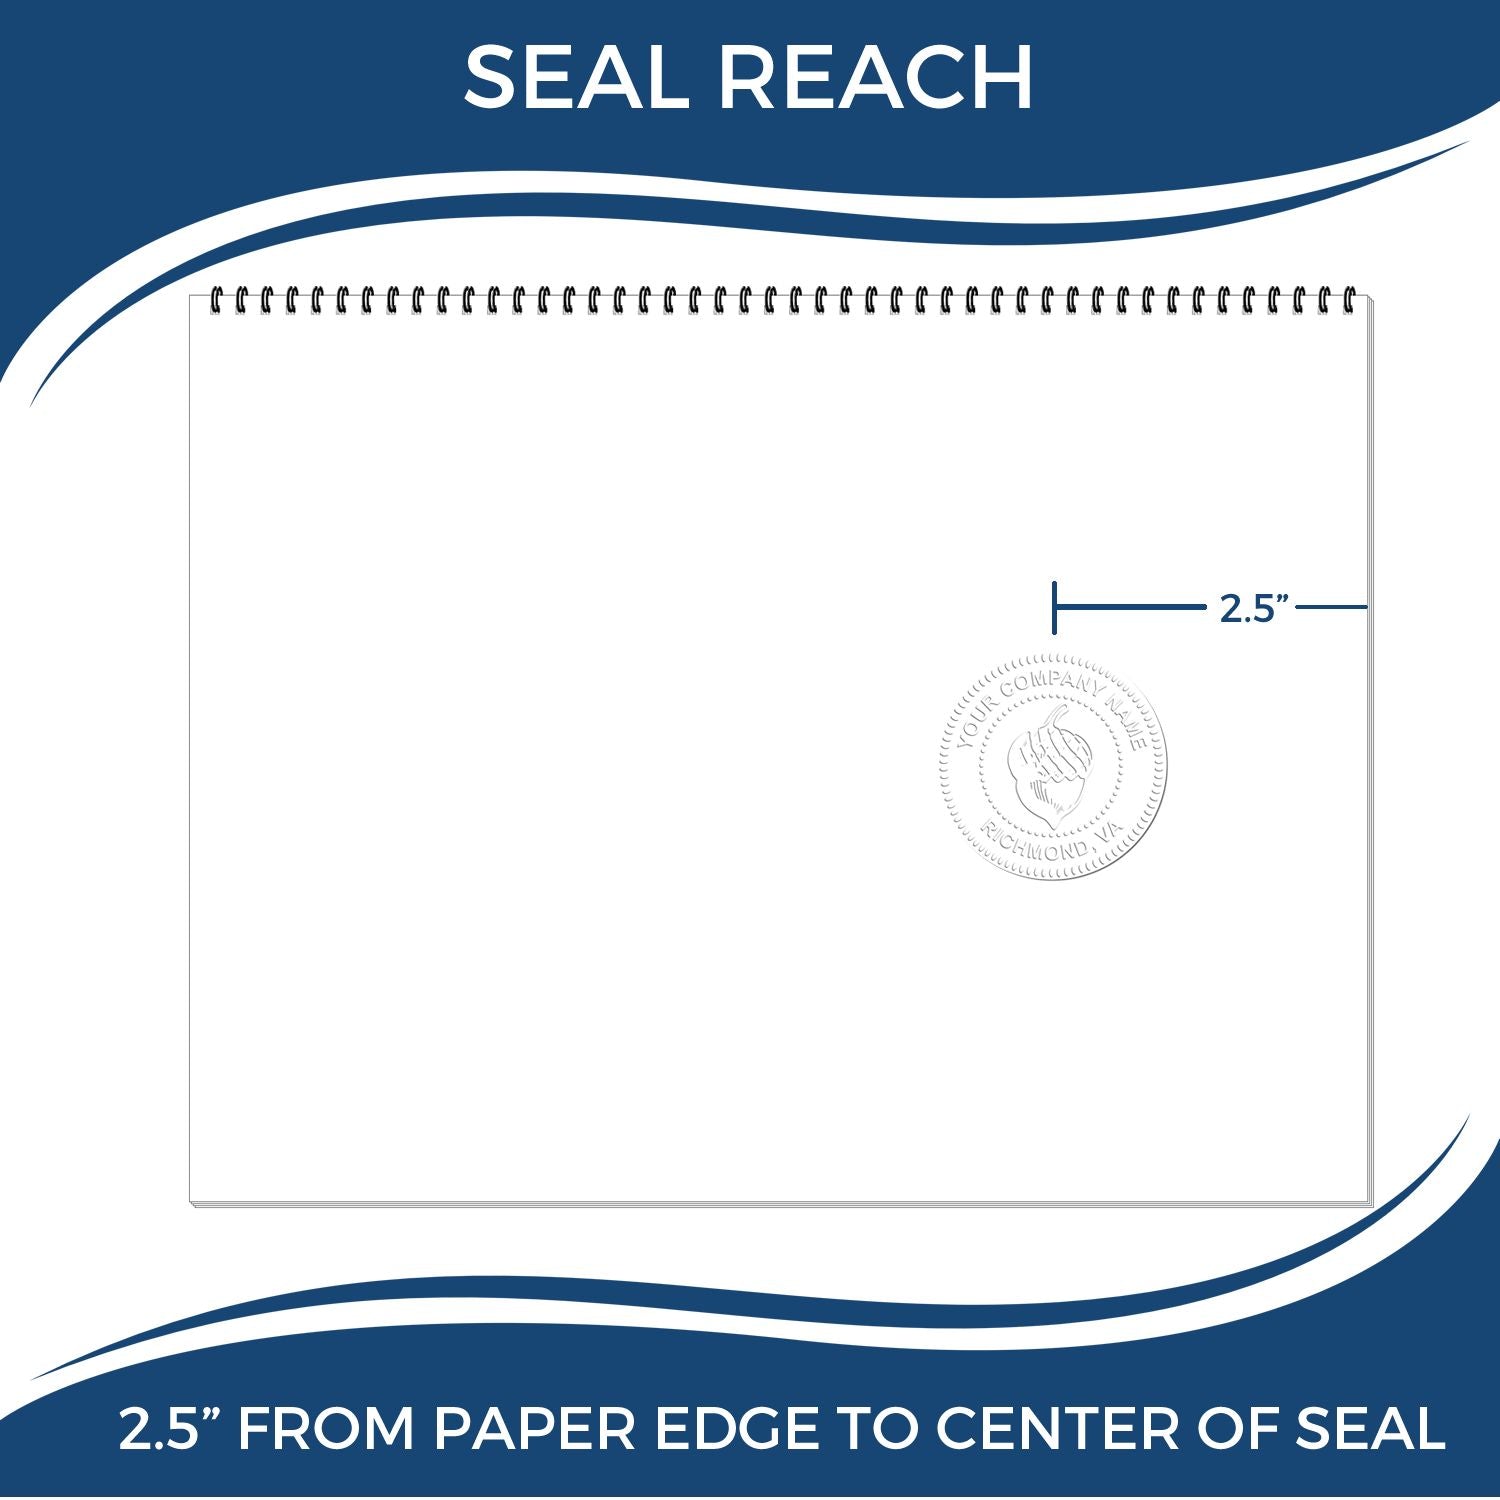 An infographic showing the seal reach which is represented by a ruler and a miniature seal image of the Long Reach Oregon PE Seal